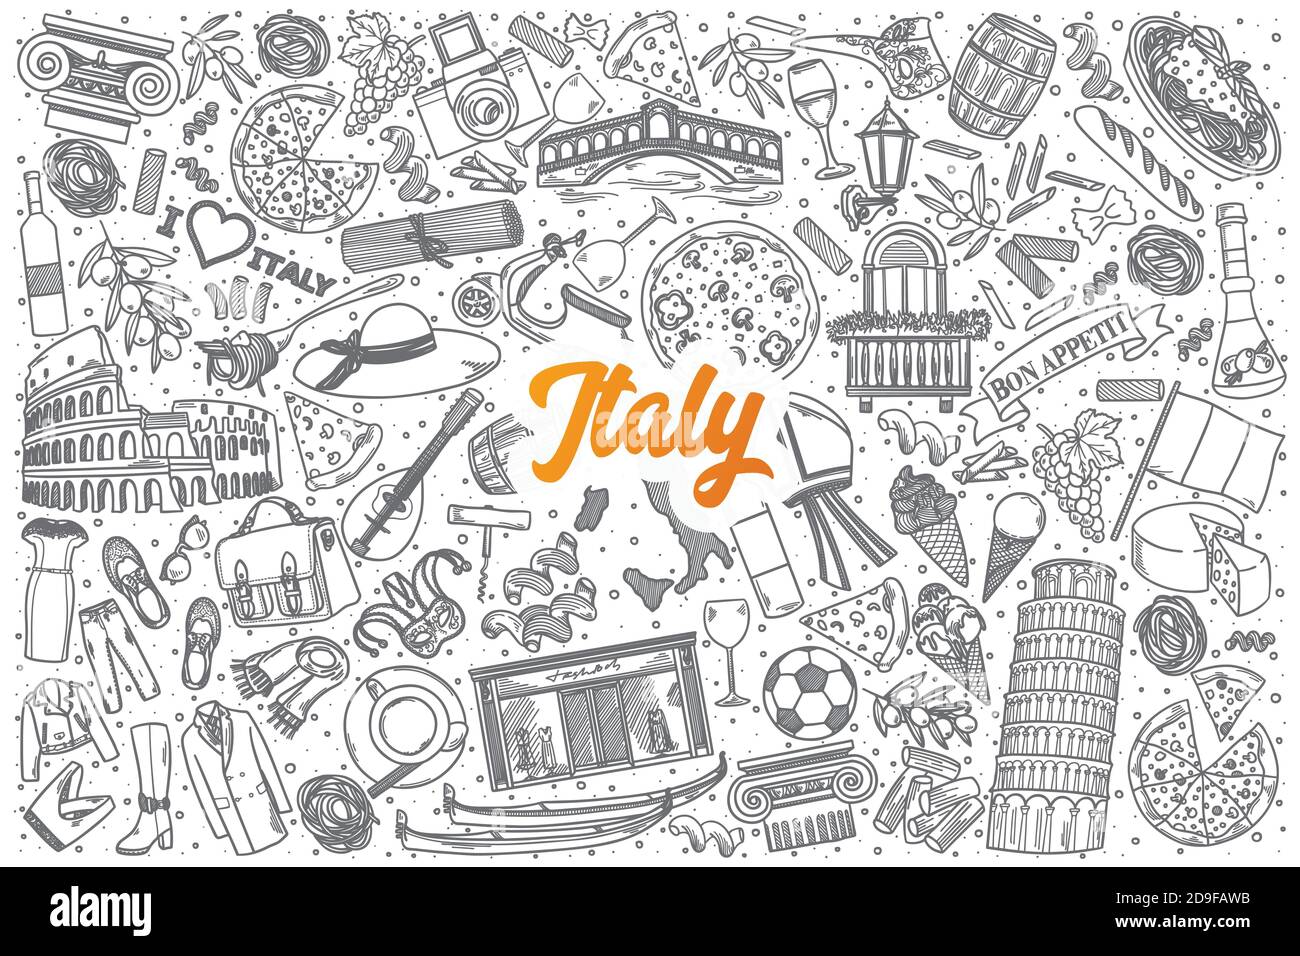 Hand drawn Italy doodle set with lettering Stock Vector